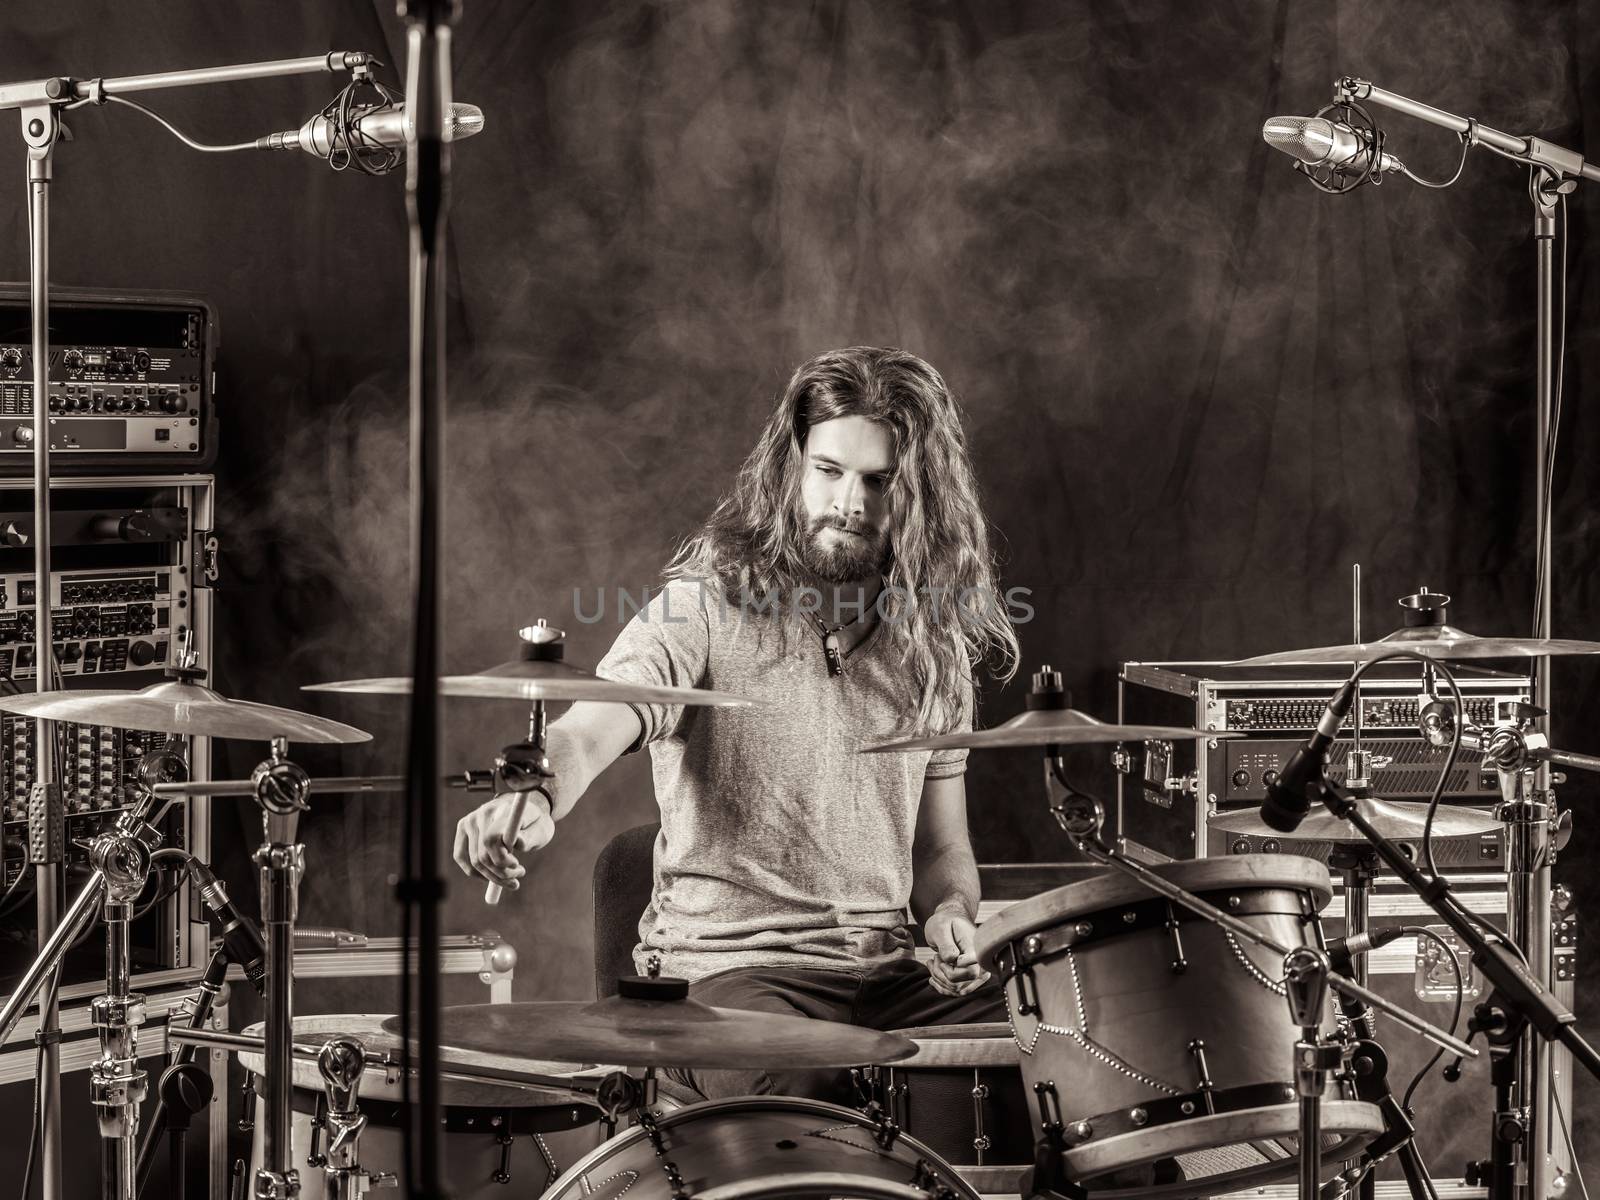 Man with long hair playing drums by sumners